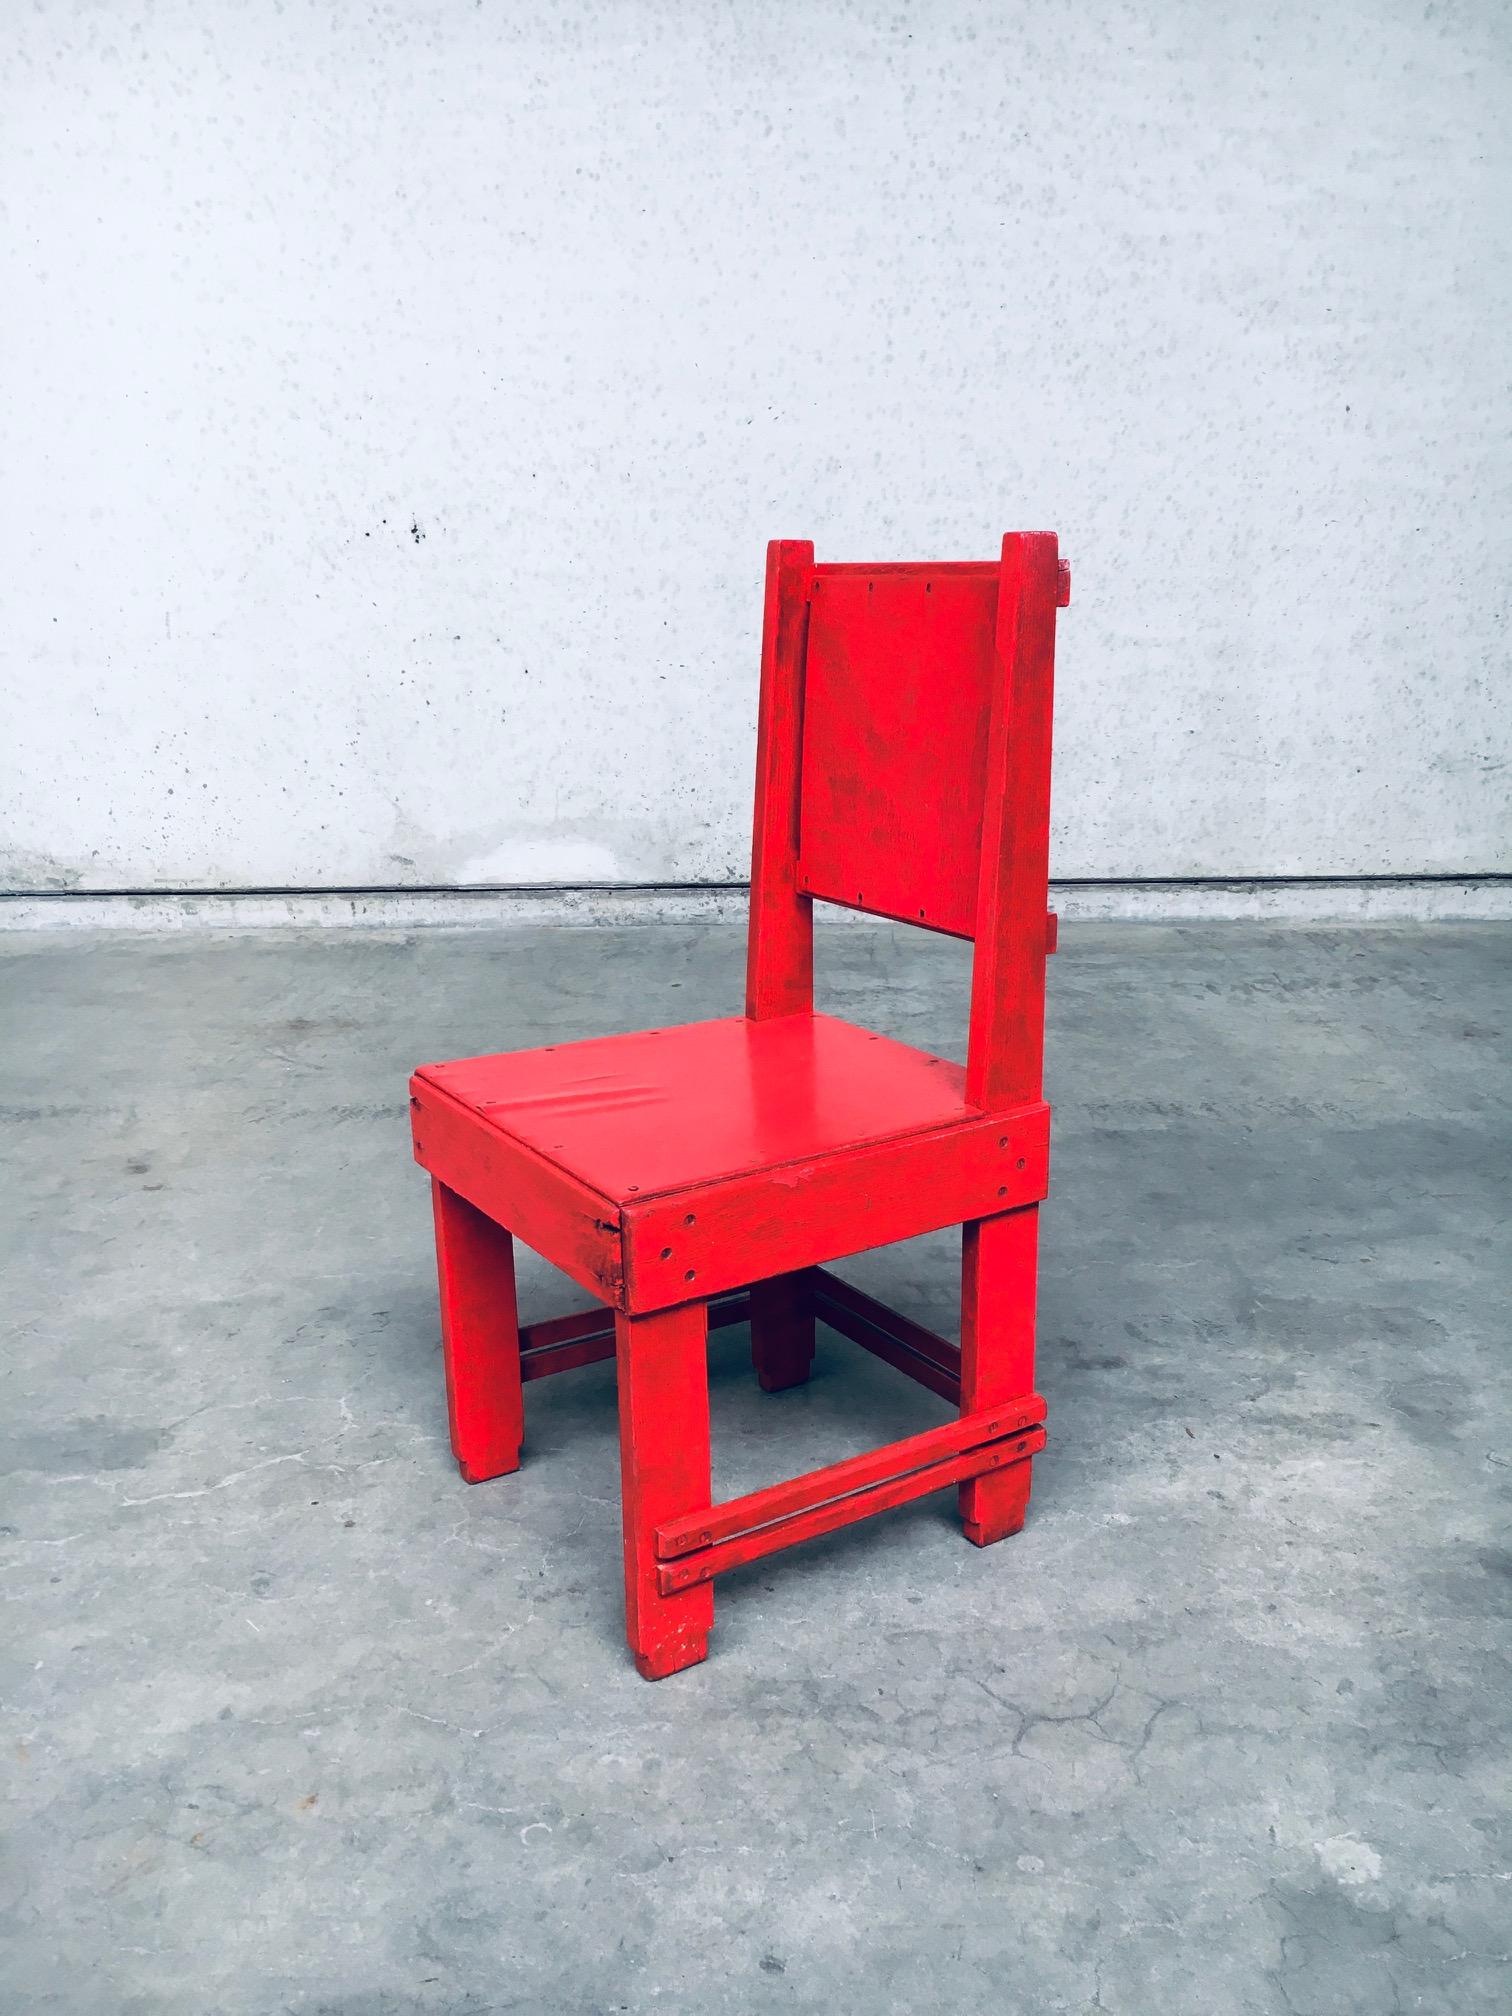 Dutch De Stijl Movement Design Red Chair Attributed to Jan Wils, 1920's Netherlands For Sale